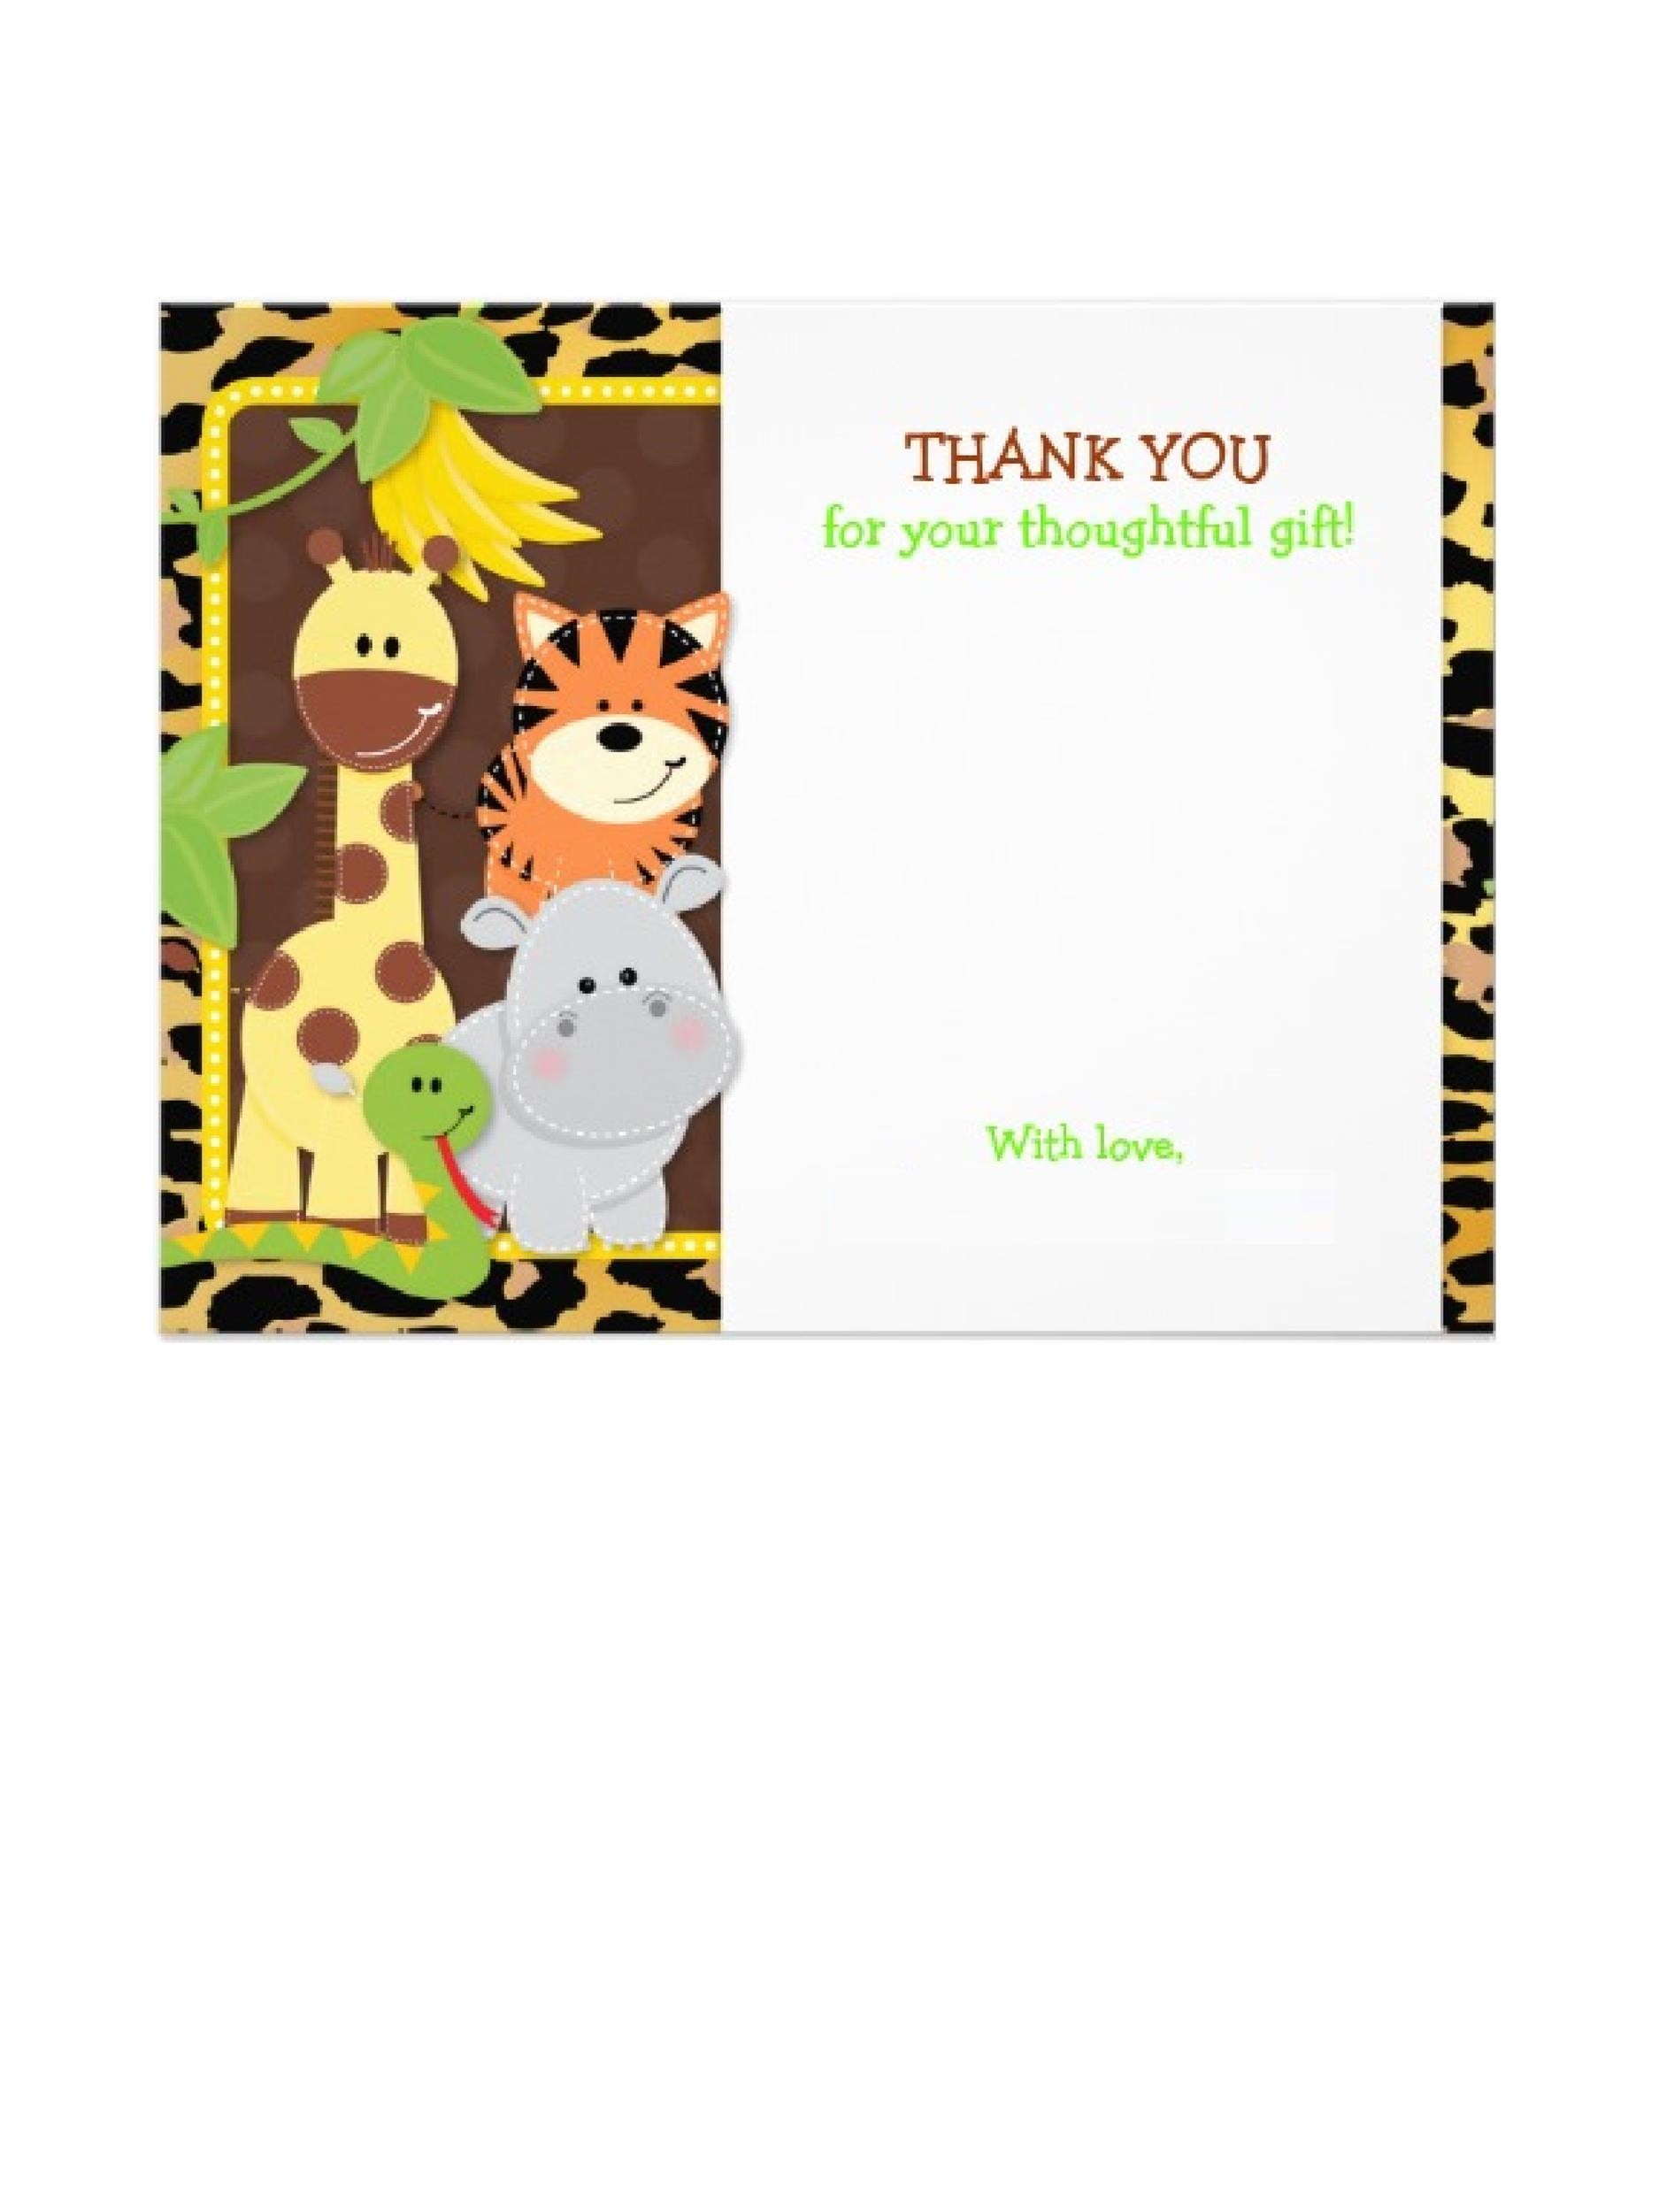 thank-you-card-templates-11-free-word-excel-pdf-formats-samples